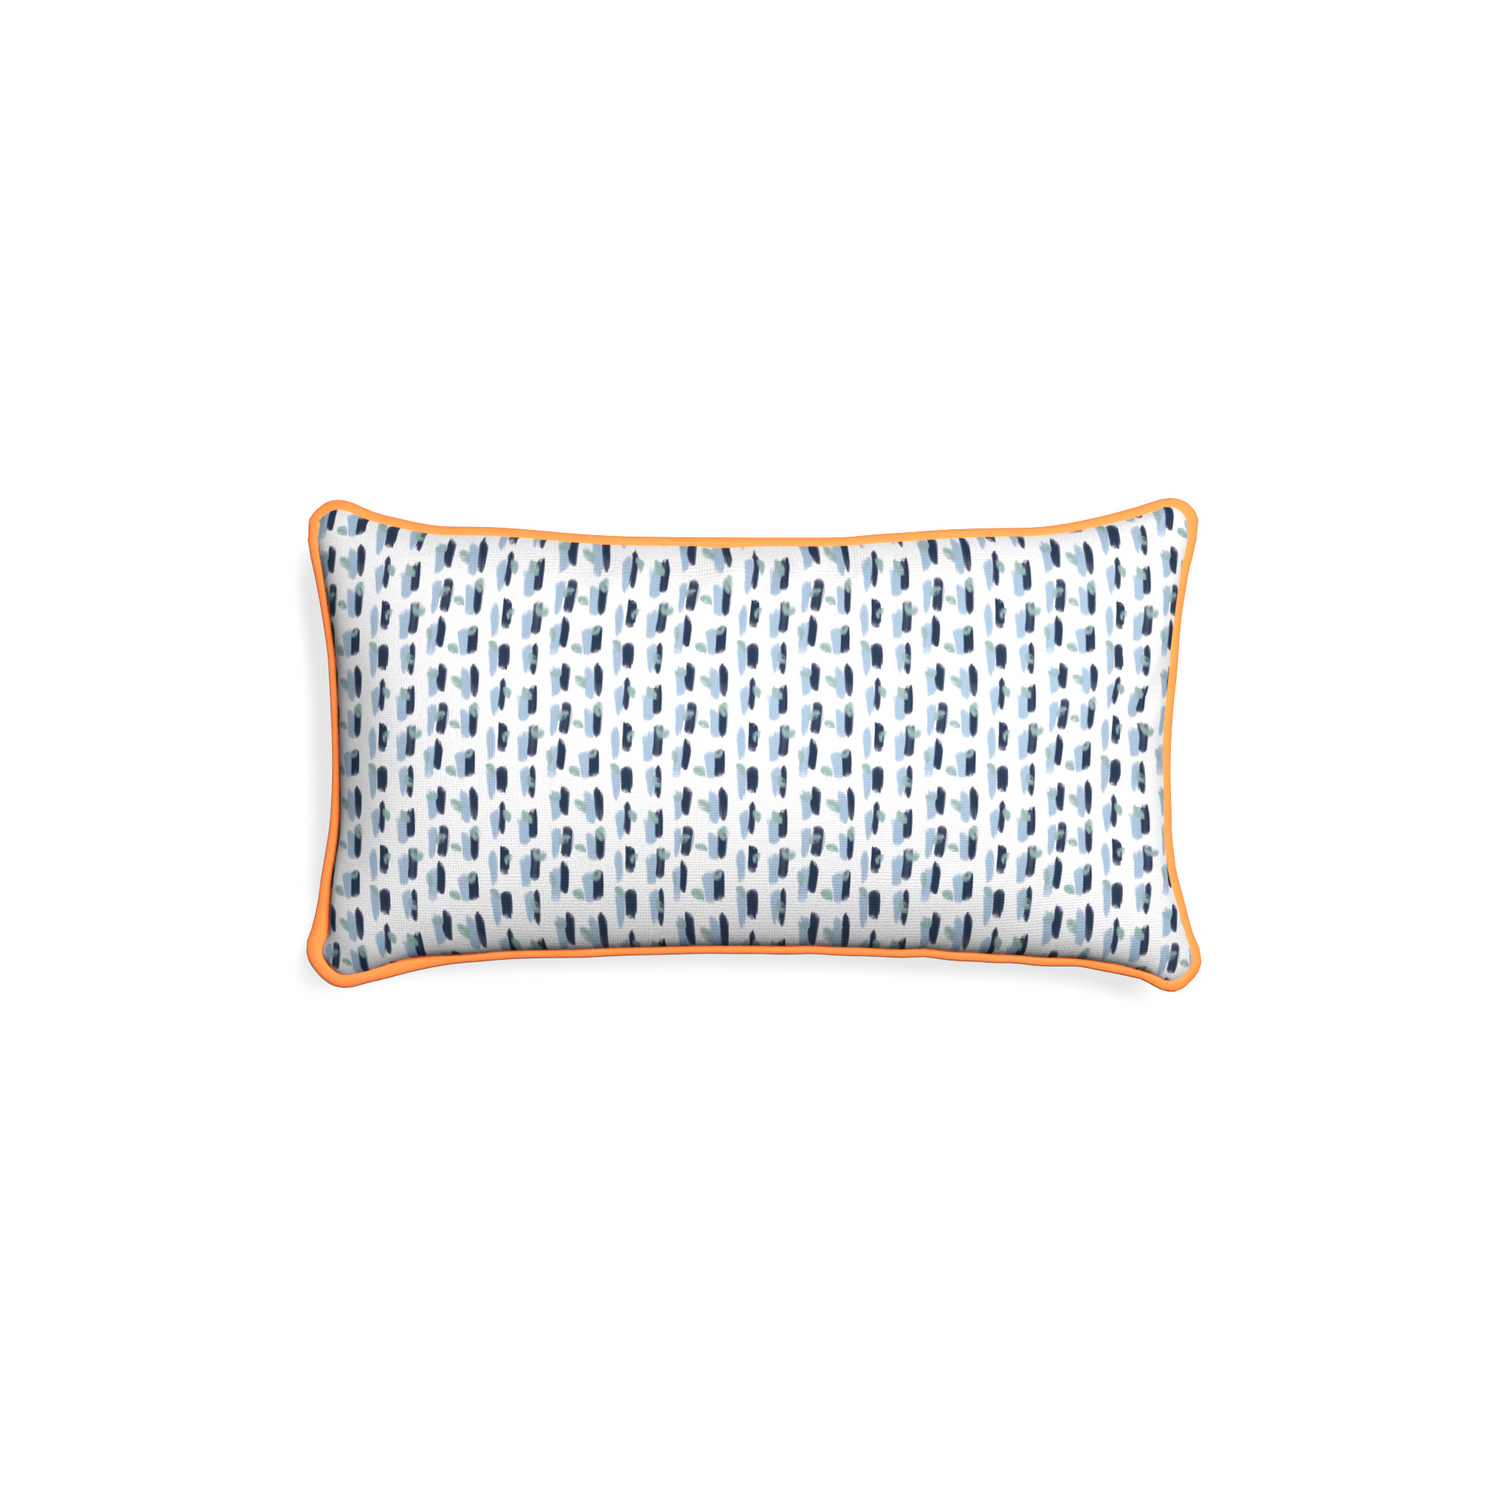 Petite-lumbar poppy blue custom blue and whitepillow with clementine piping on white background